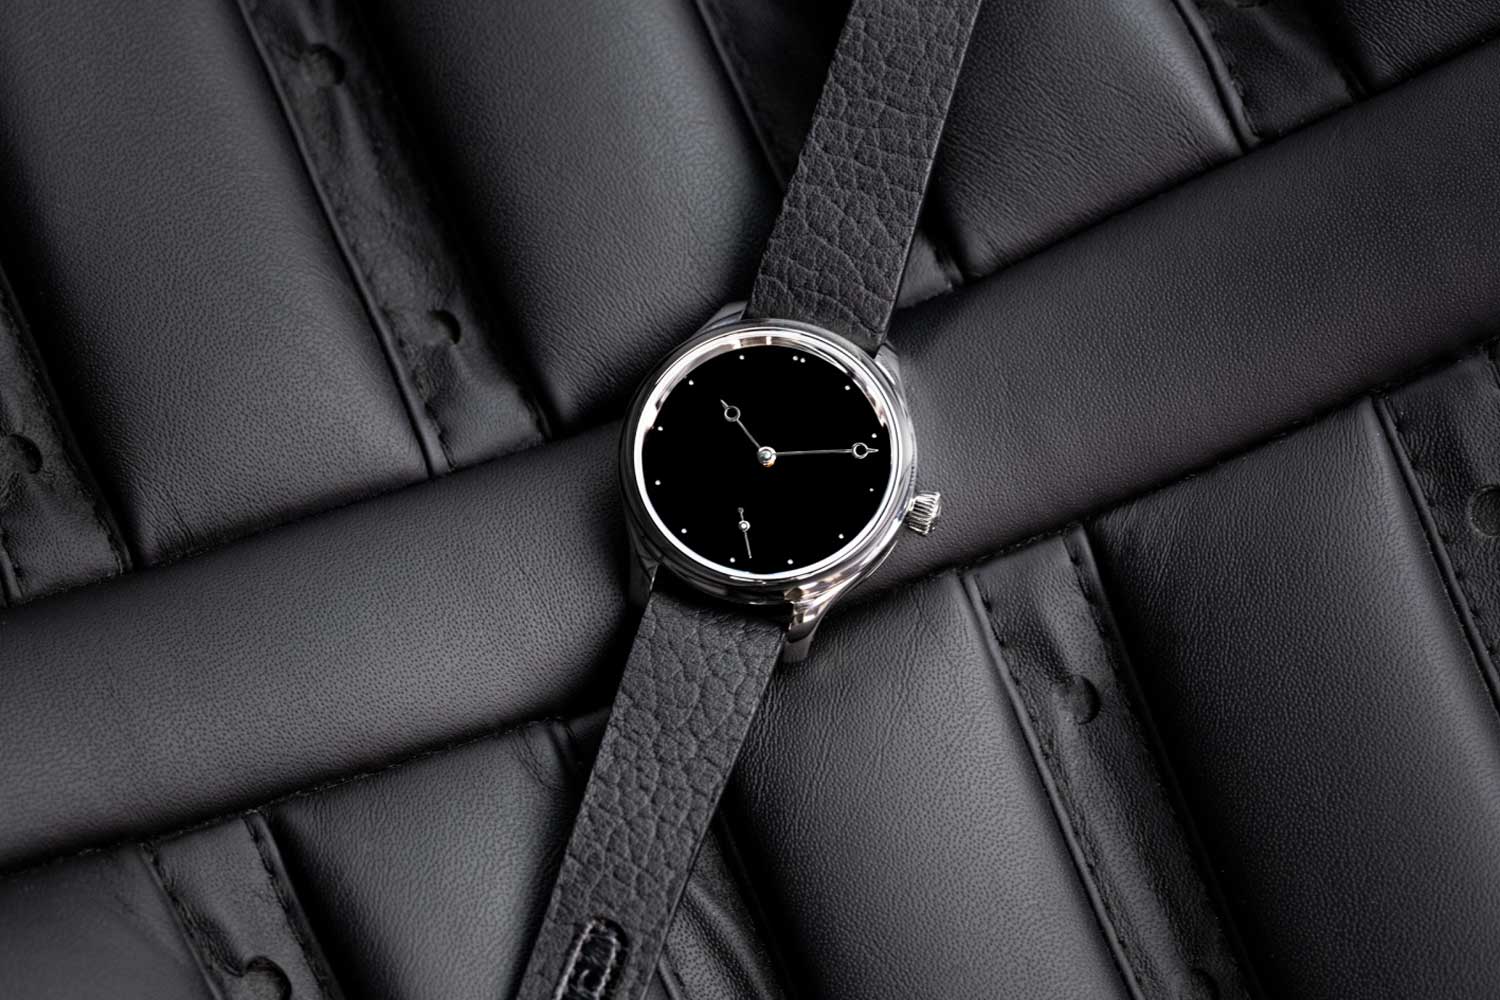 H. Moser & Cie x The Armoury Endeavour Small Seconds Total Eclipse in steel